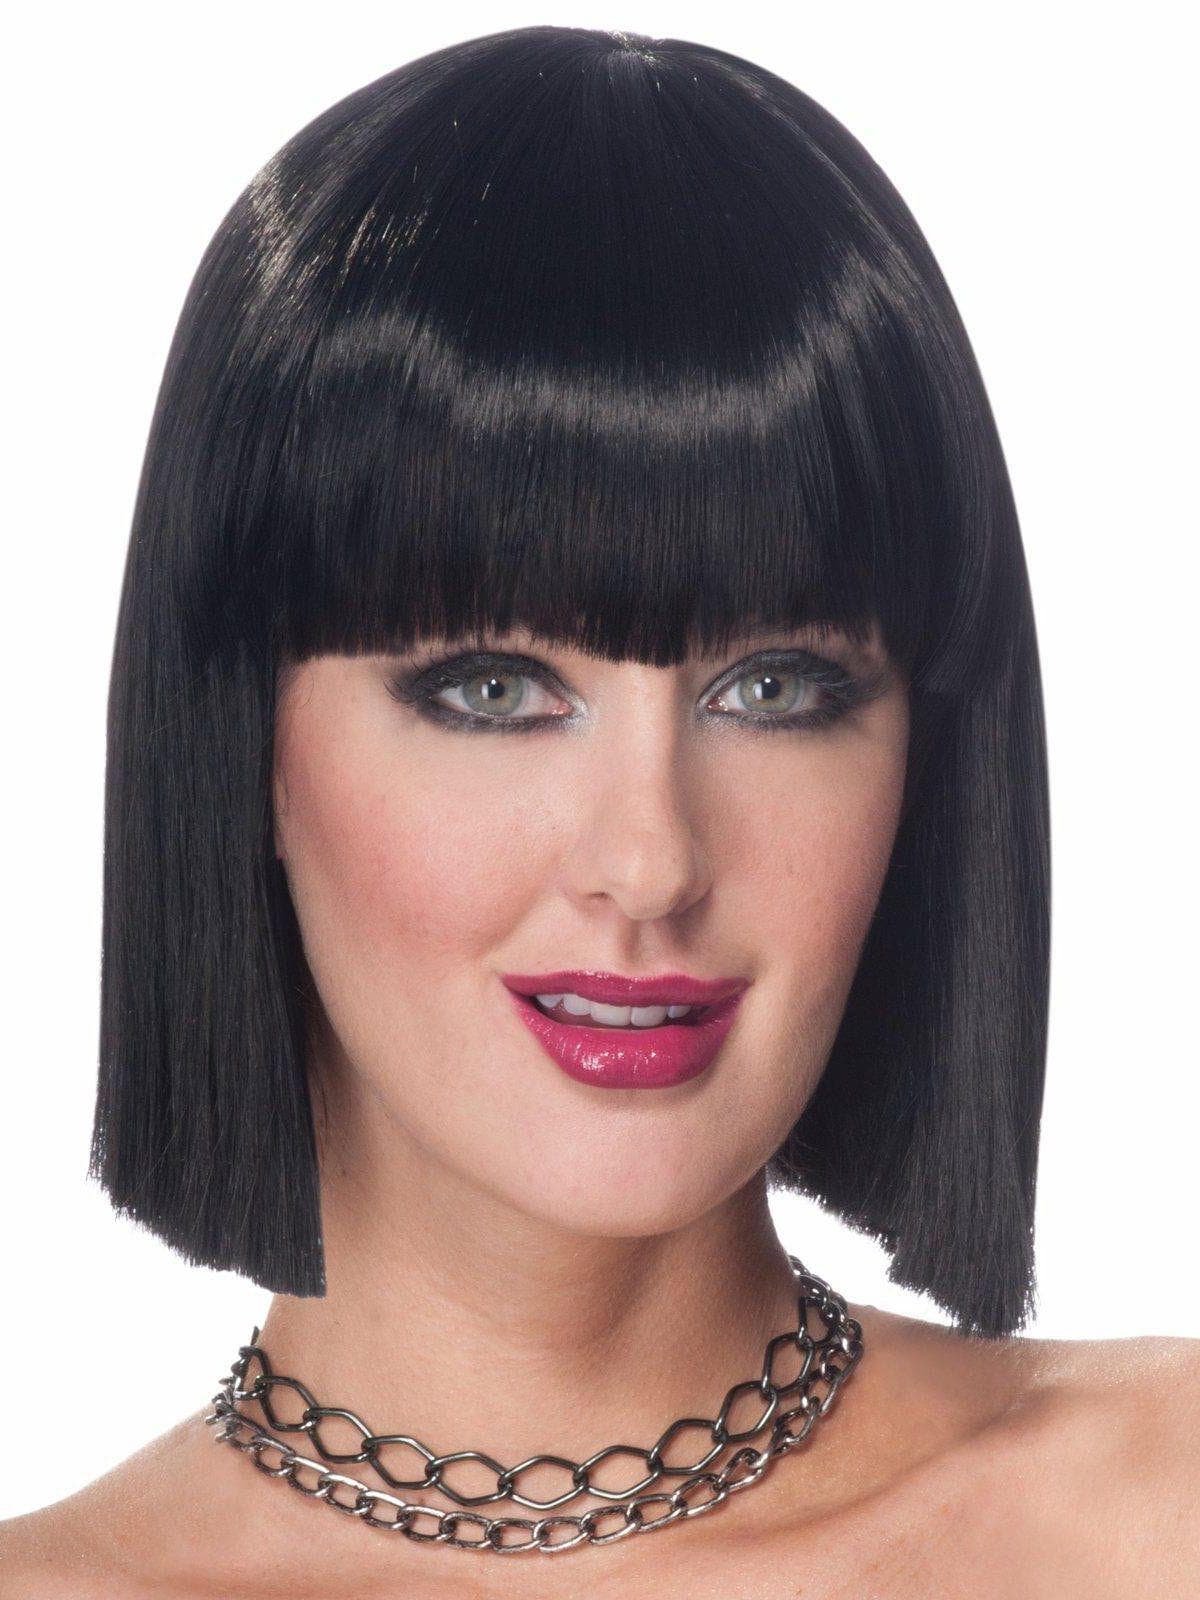 Women's Black Vibe Wig with Bangs - costumes.com